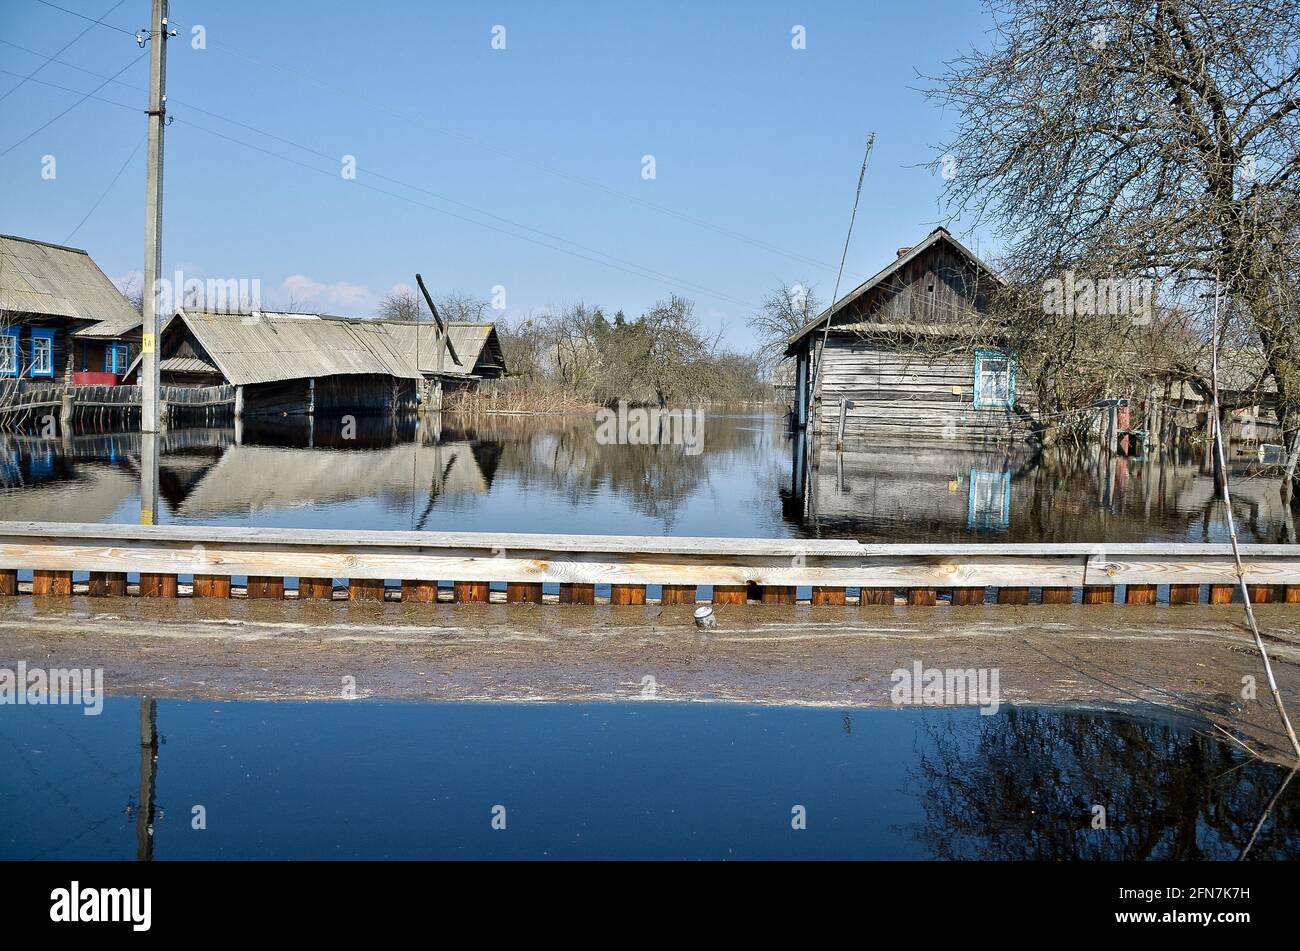 Belarus. Villagers Snyadin - 16.04.2013: Every year the villagers Snyadin are struggling with the consequences of a flood of the Pripyat River. 16.04.2013.  Stock Photo